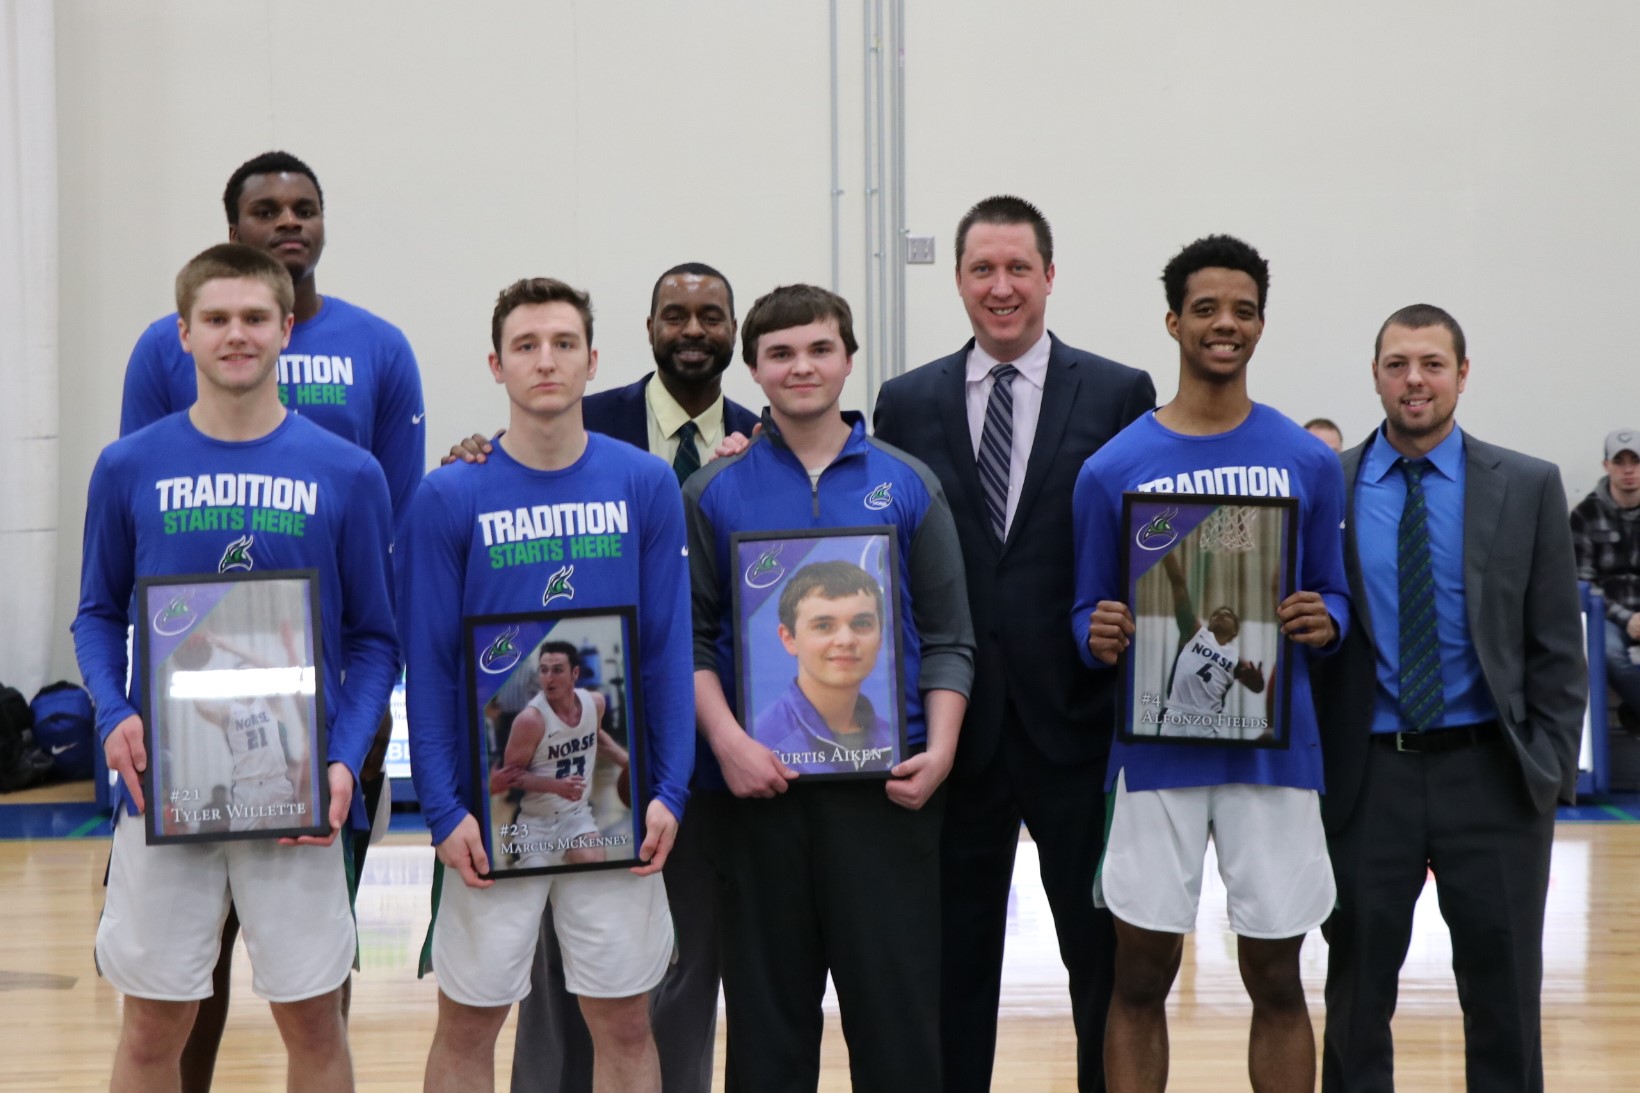 Front row, left to right: Tyler Willette, Marcus McKenney, Curtis Aiken, and Alfonzo Fields all holding pictures they were just given.  Back row, left to right: Kobi Barnes, Narveil Fernandez, Matt Johnson, Matt Gregory